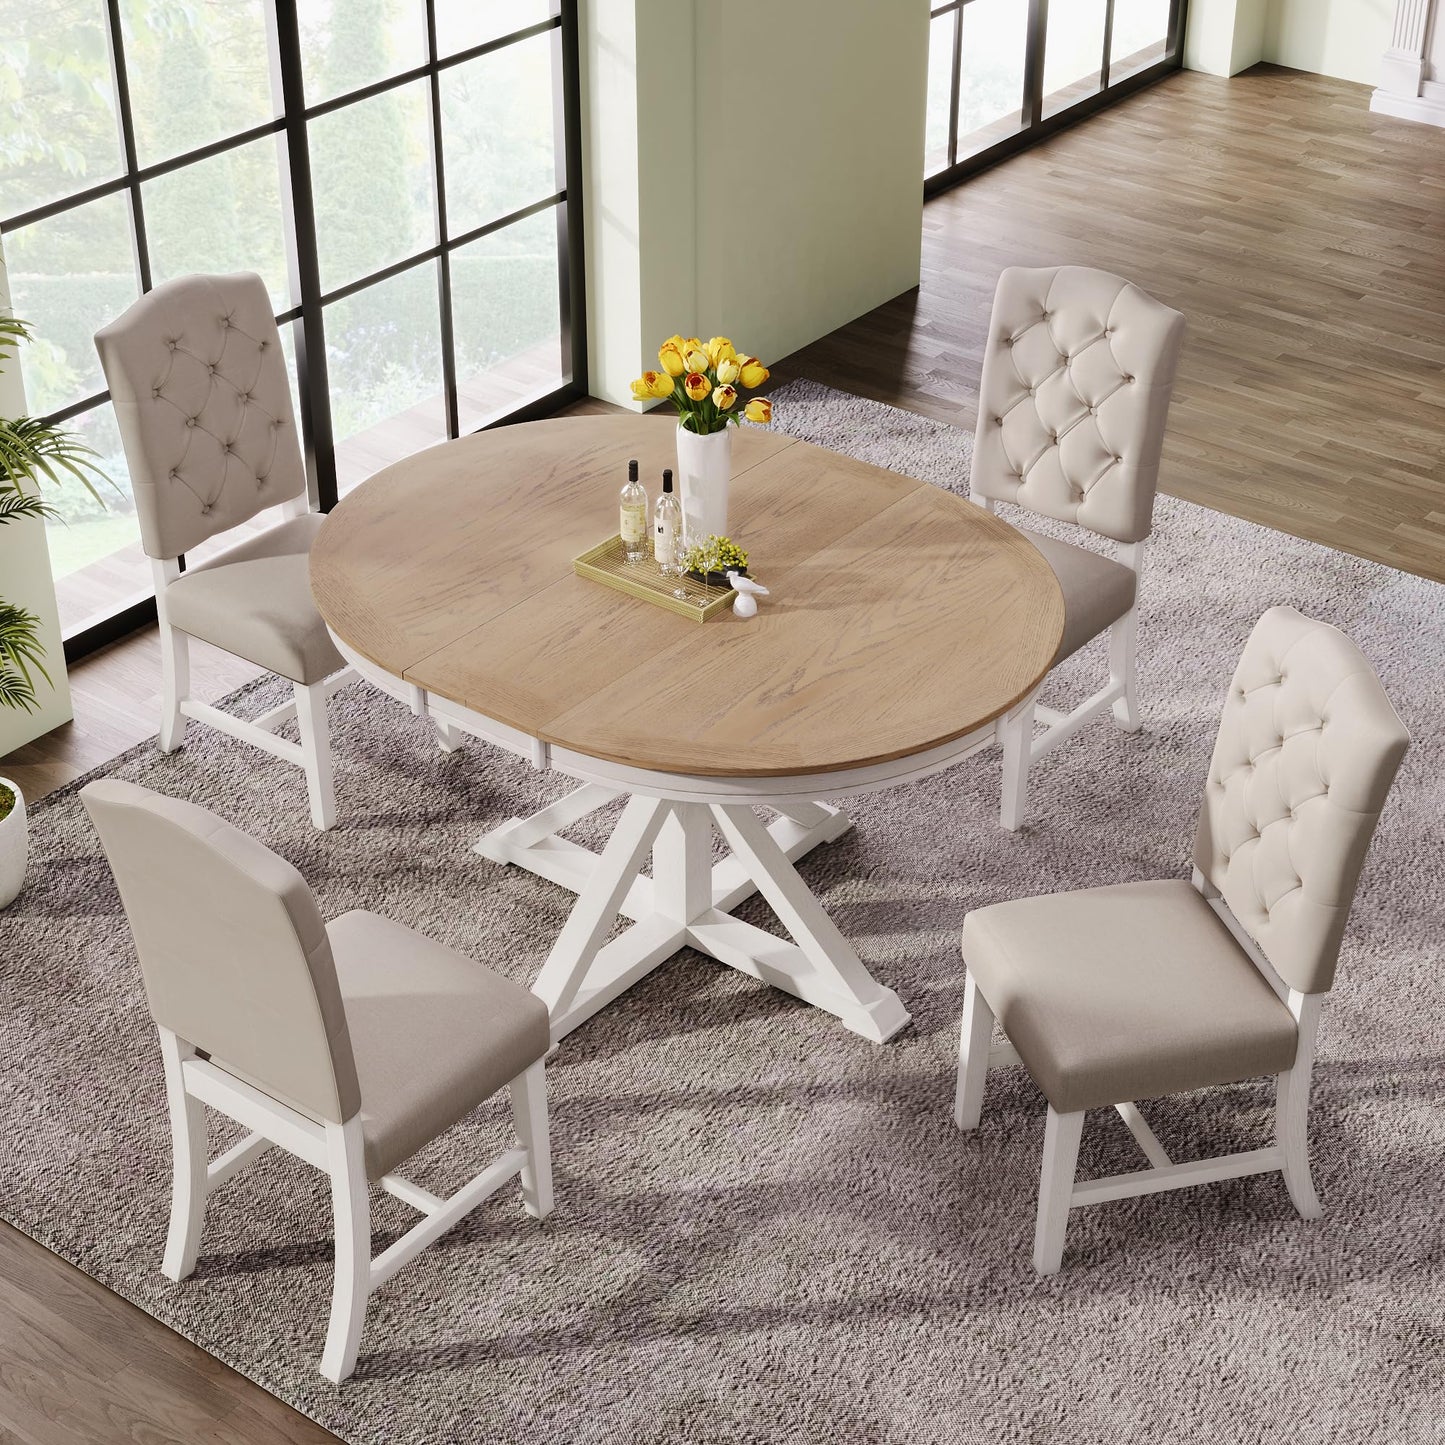 Merax 5 Piece Kitchen Extendable Dining Table Set, Wood Round Dining Table Set with Extendable Table and 4 Upholstered Chairs for Dining Room, Living Room (Oak Natural Wood + Off White)